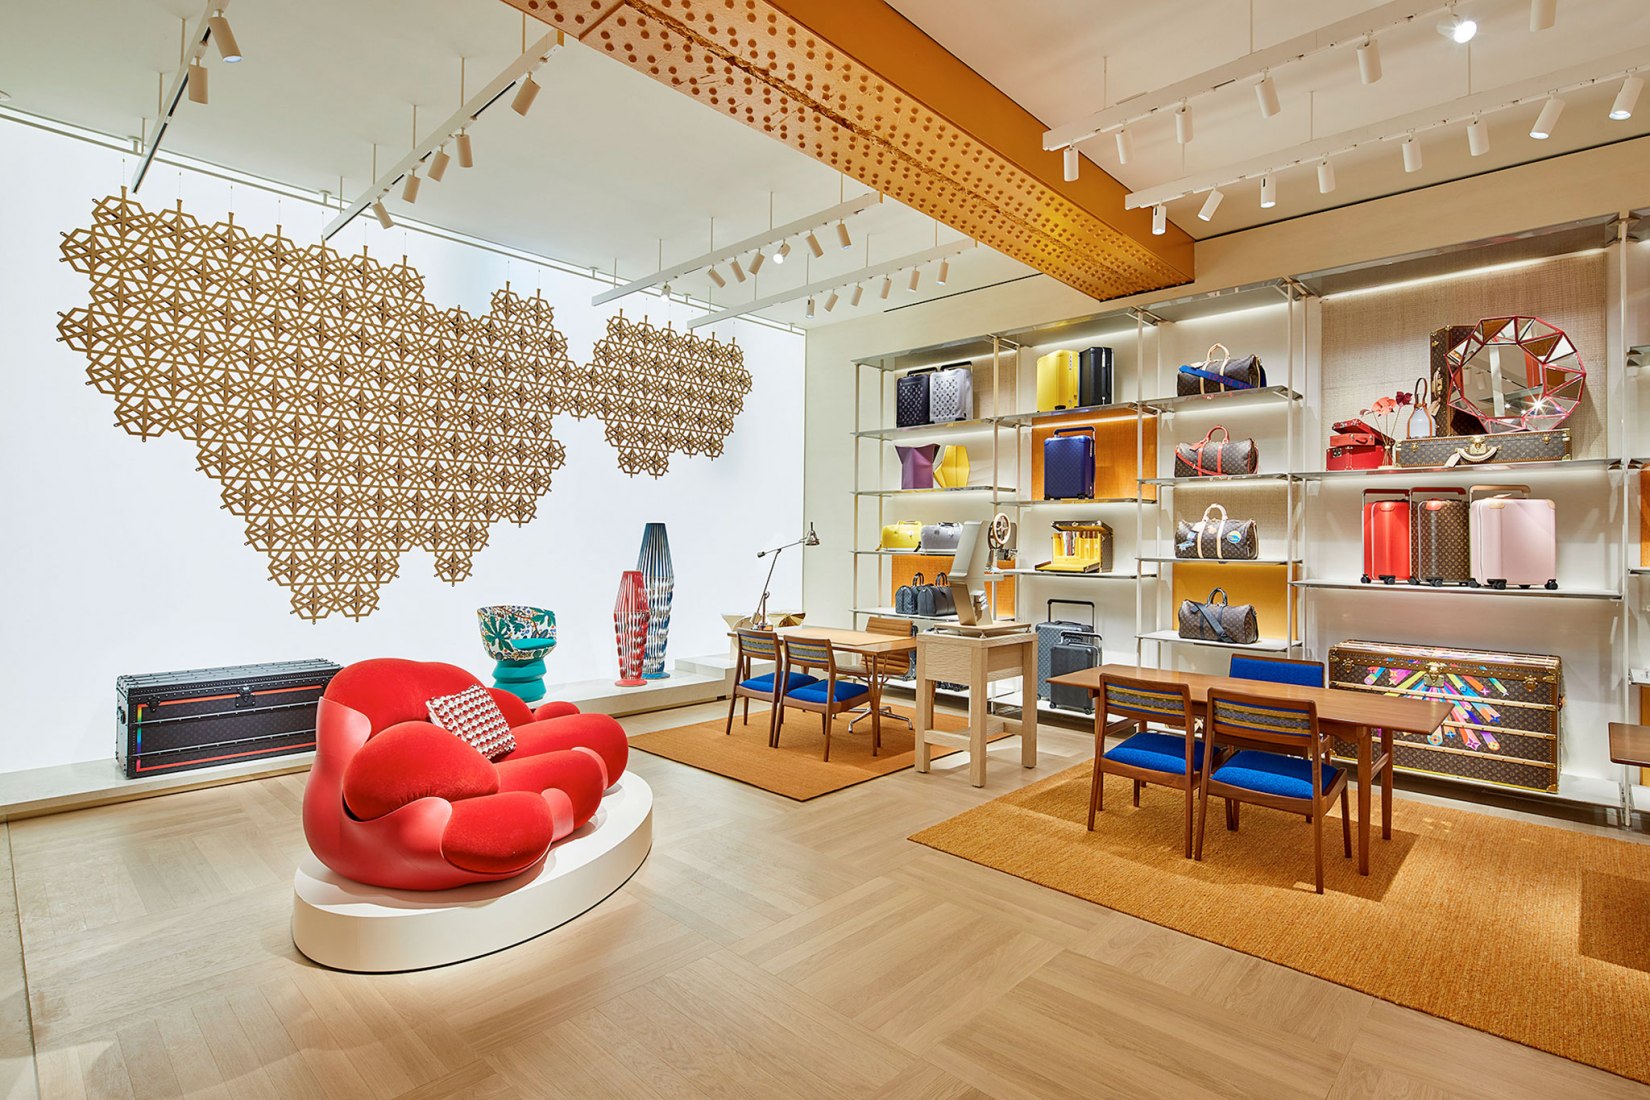 &#39;The Spectacle Store&#39;. Louis Vuitton&#39;s Peter Marino-renovated London flagship | The Strength of ...